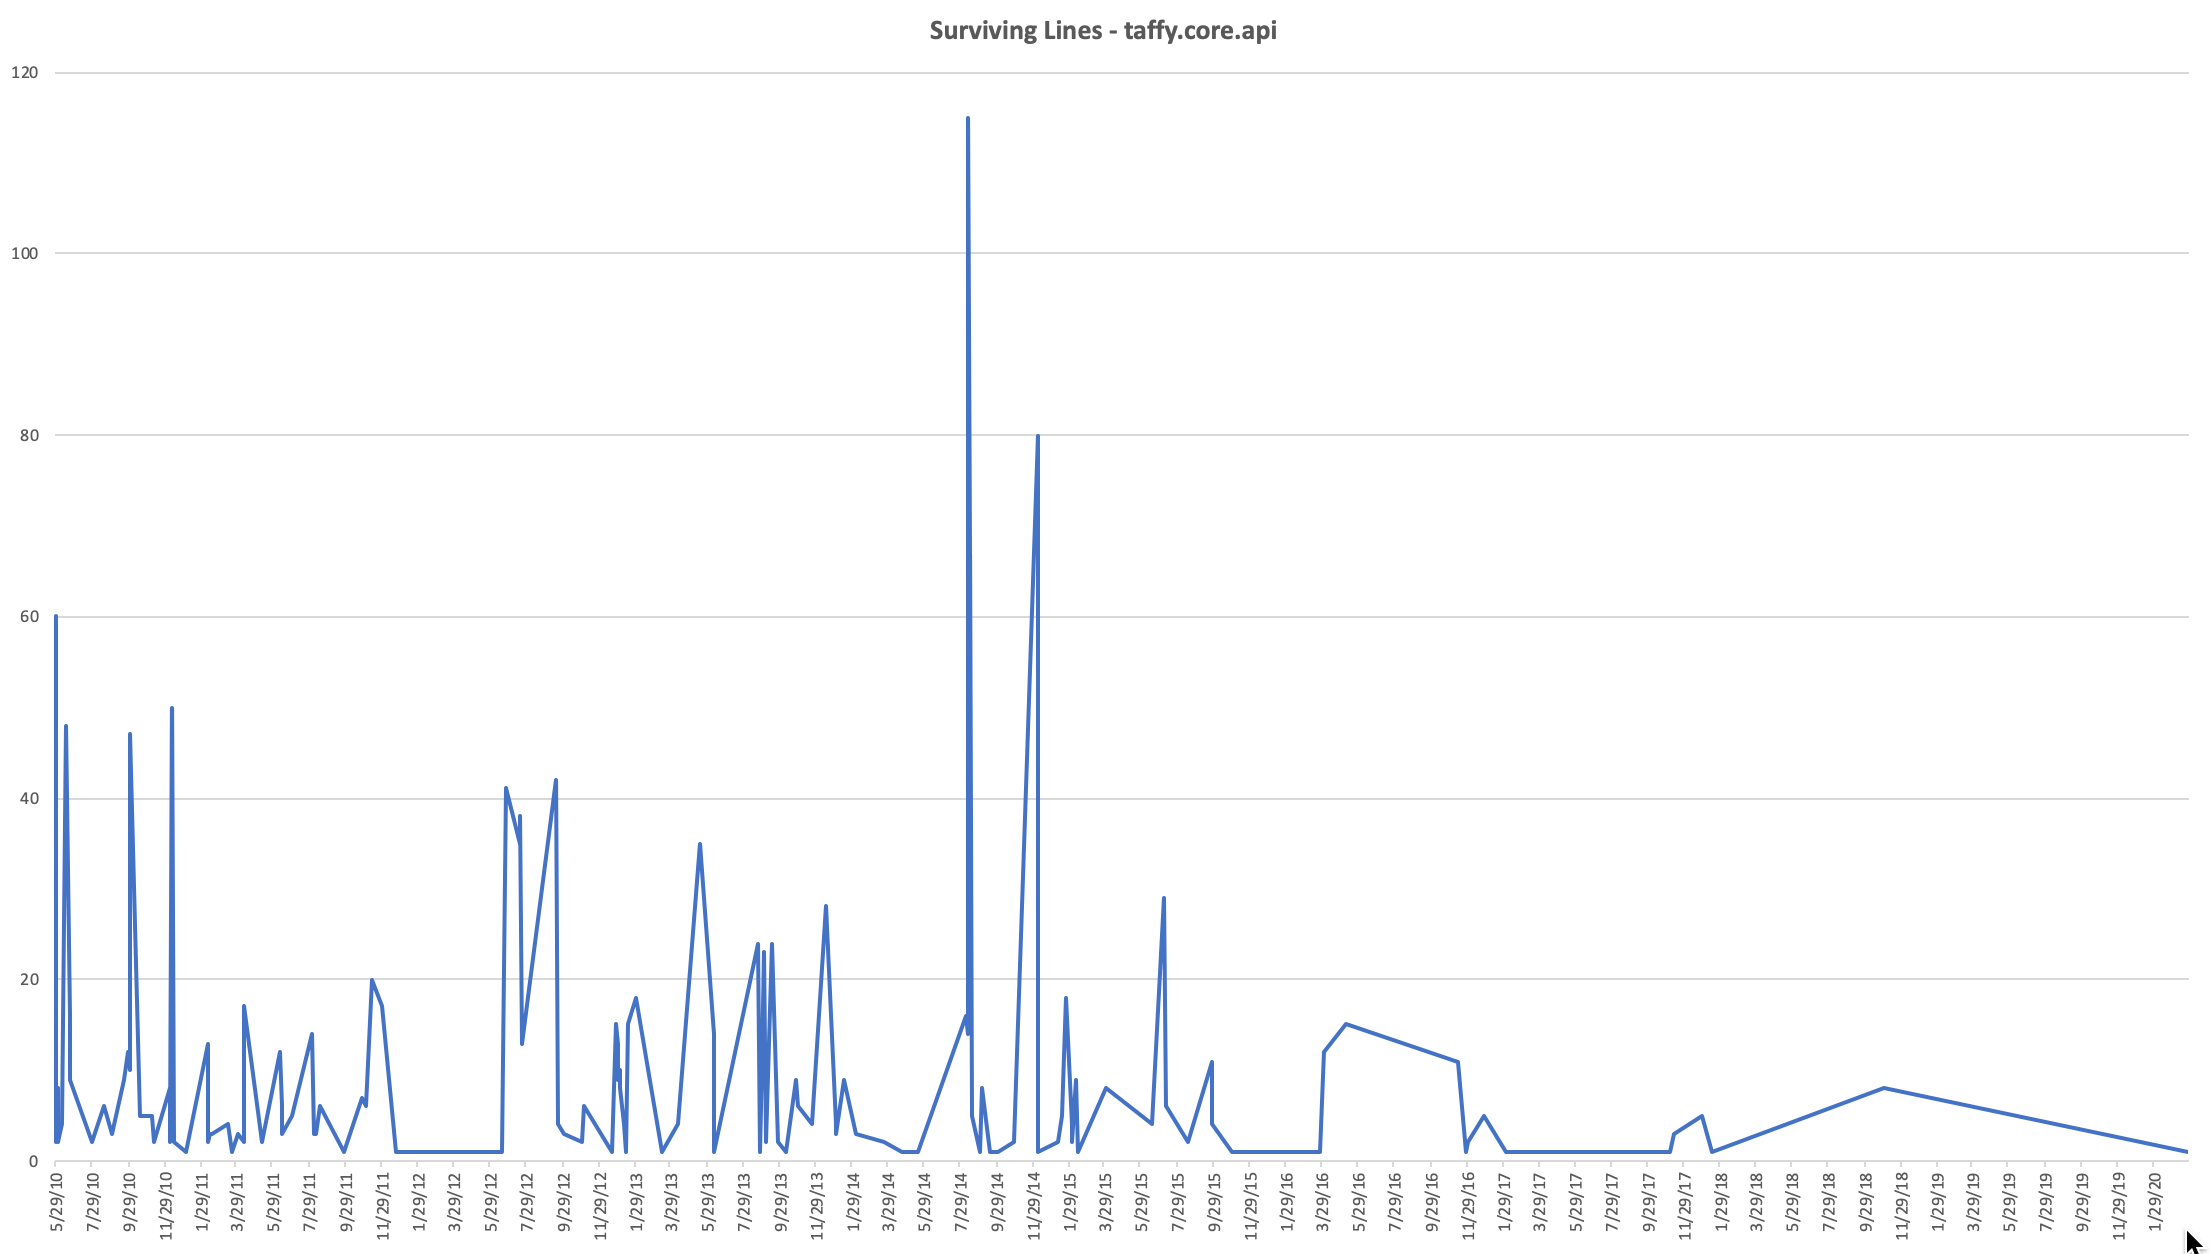 A chart showing the line counts of taffy.core.api by date they were written.